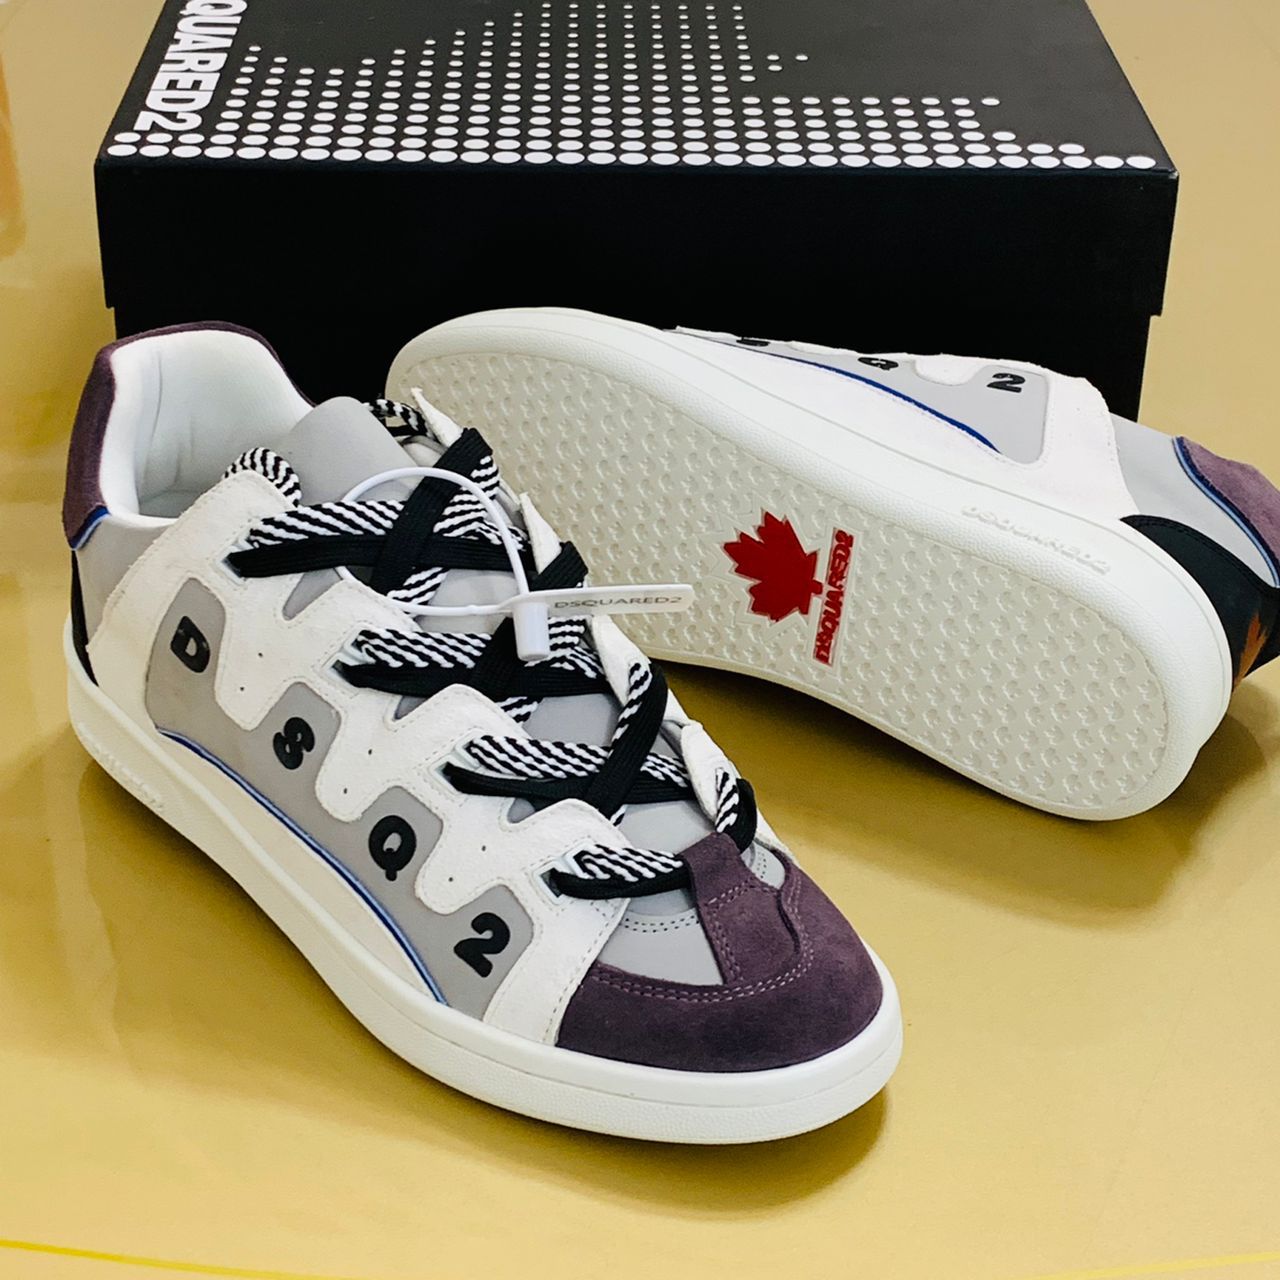 DESIGNER PANELLED DSQ2 LOW SNEAKERS